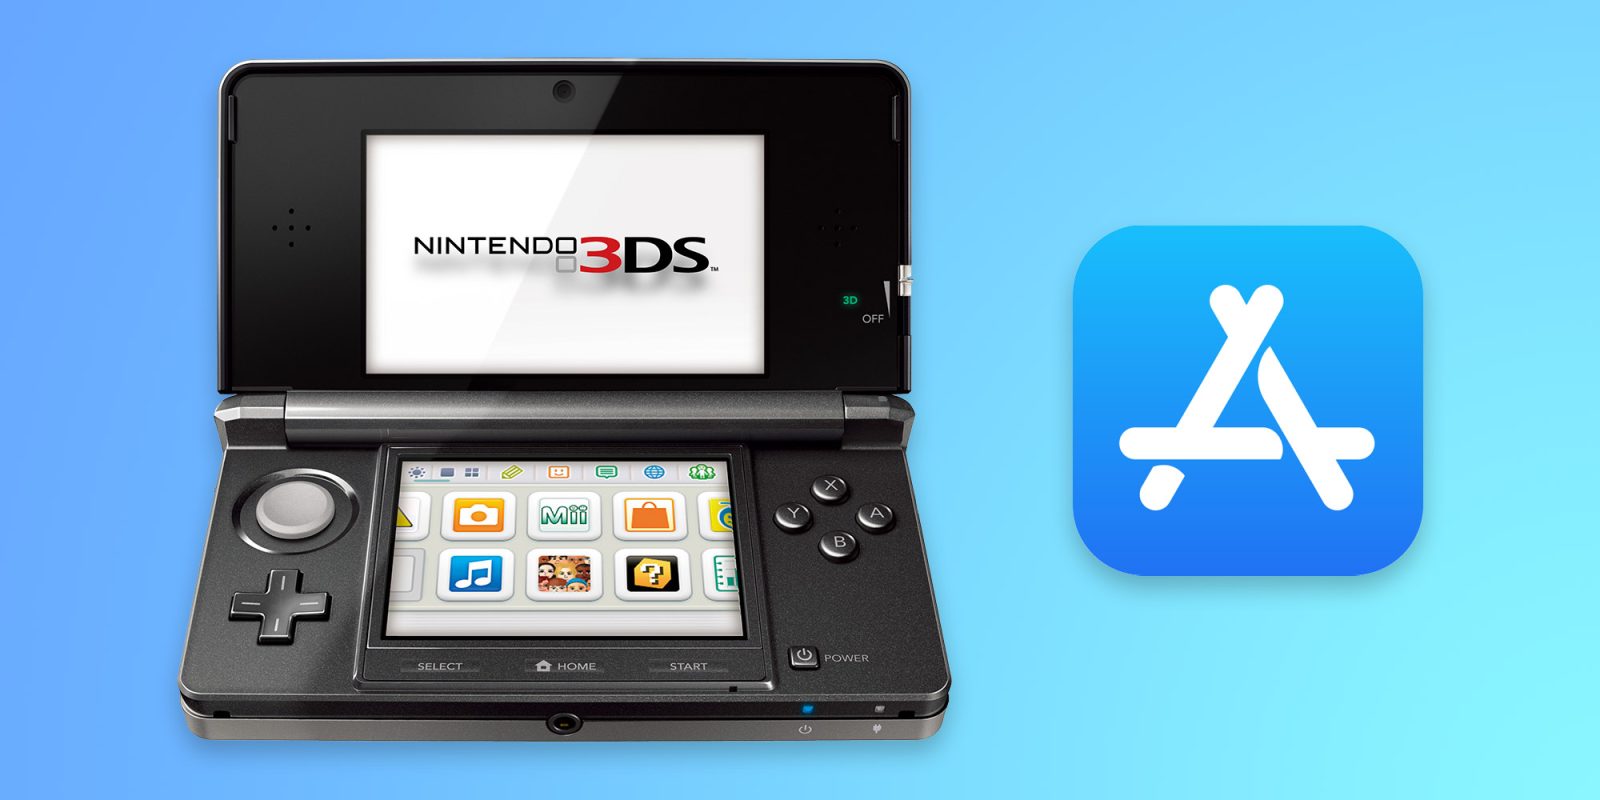 There's now a Nintendo 3DS game emulator available on the iOS App Store